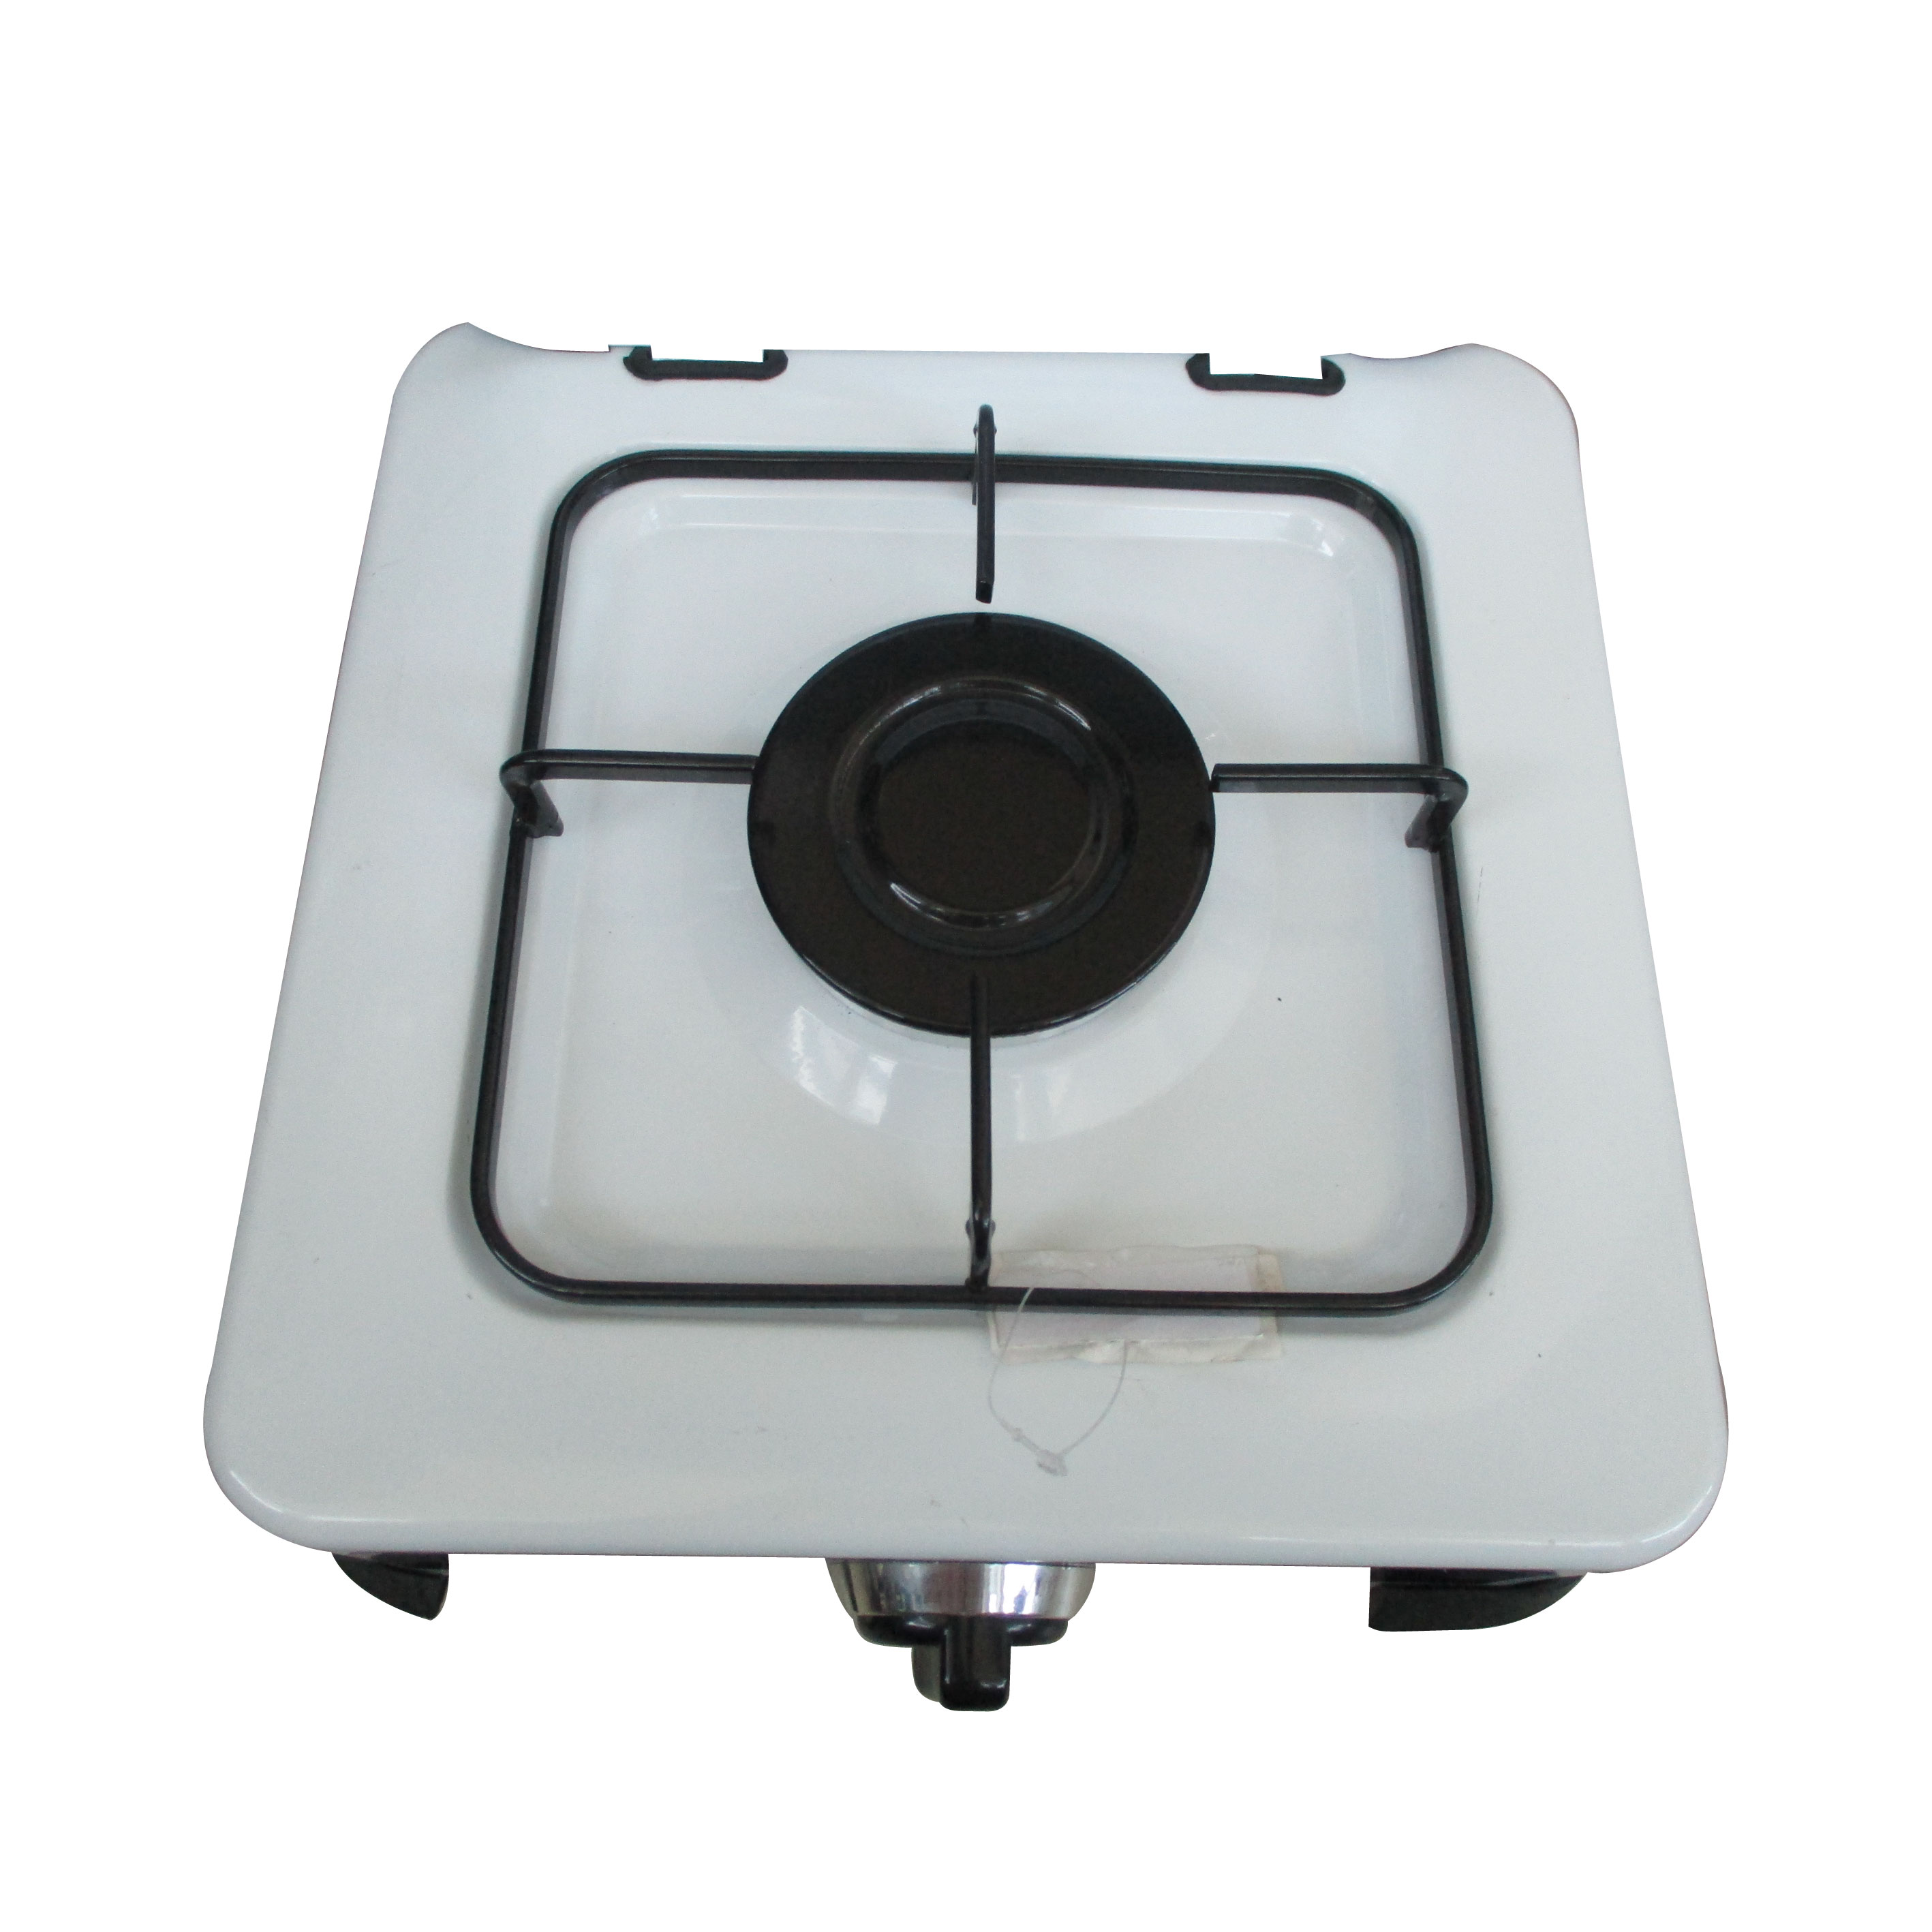 Lexical Gas Stove Table Top 1 Burners, LGS2811